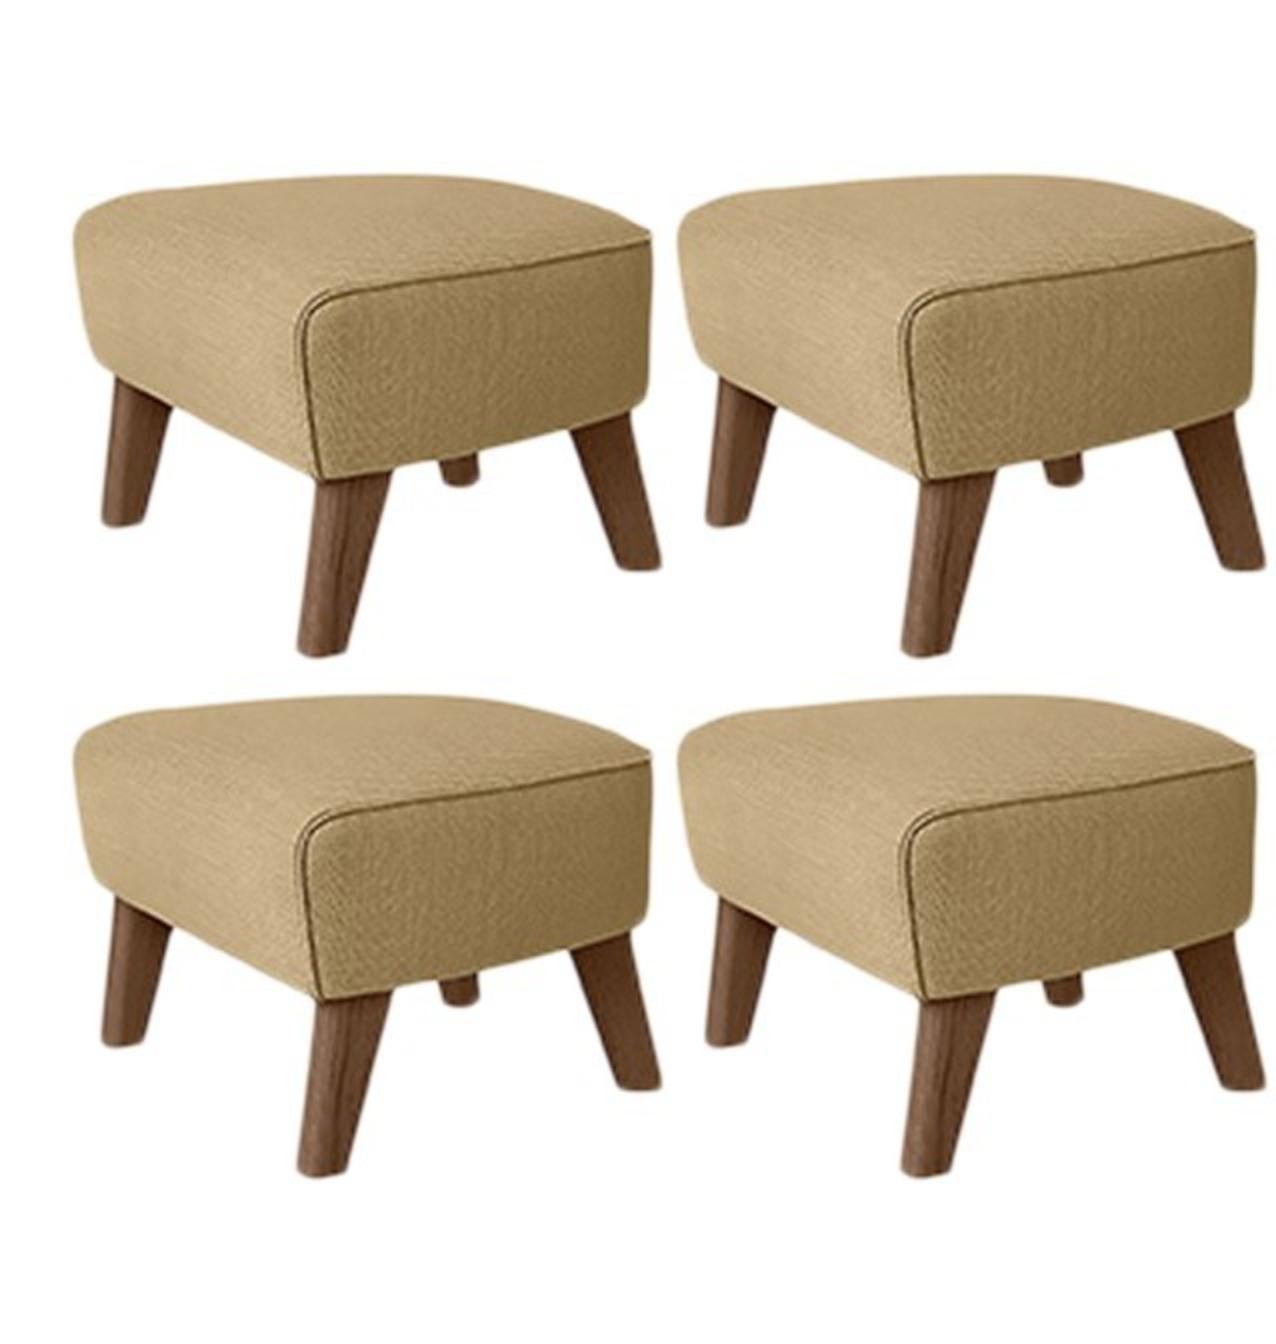 Set of 4 sand, smoked oak Raf Simons Vidar 3 My Own Chair Footstool by Lassen
Dimensions: W 56 x D 58 x H 40 cm 
Materials: Textile
Also available: other colors available,

The My Own Chair Footstool has been designed in the same spirit as